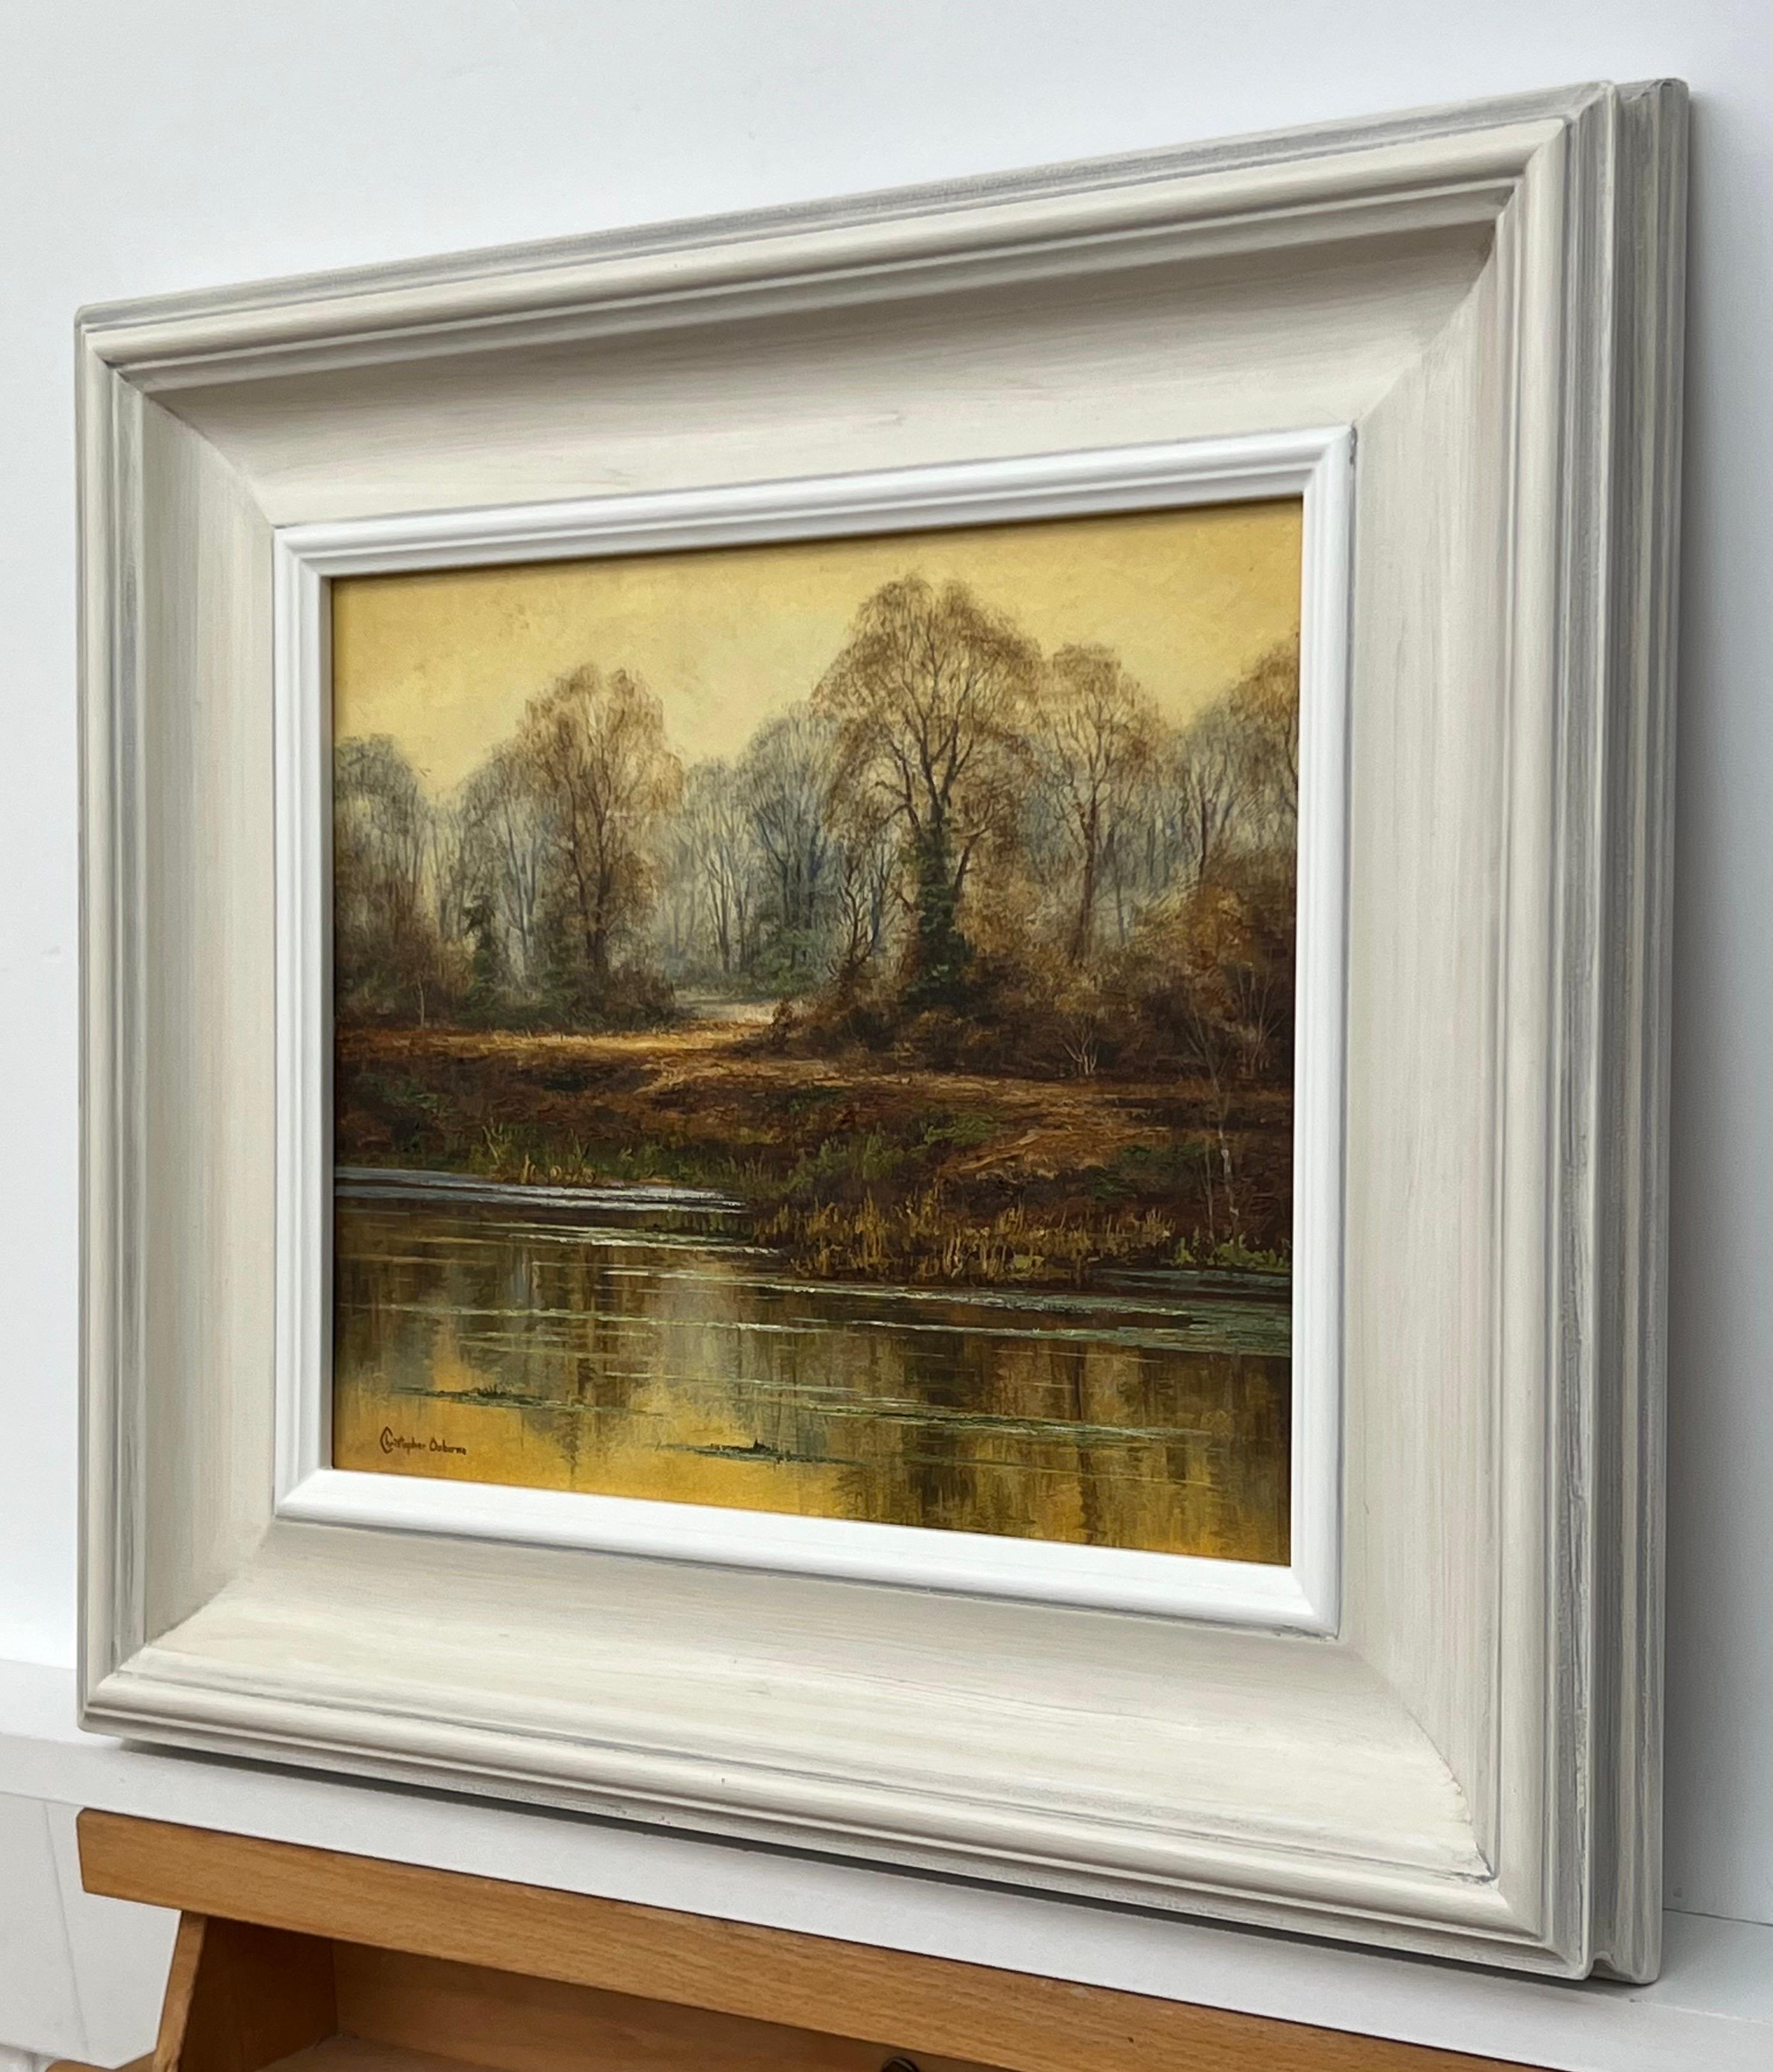 Reflections on Forest Pond in the English Countryside with Warm Yellows & Browns, by 20th Century British Artist, Christopher Osborne.

Art measures 12 x 10 inches
Frame measures 18 x 16 inches

Signed, unique original, oil on board, presented in a